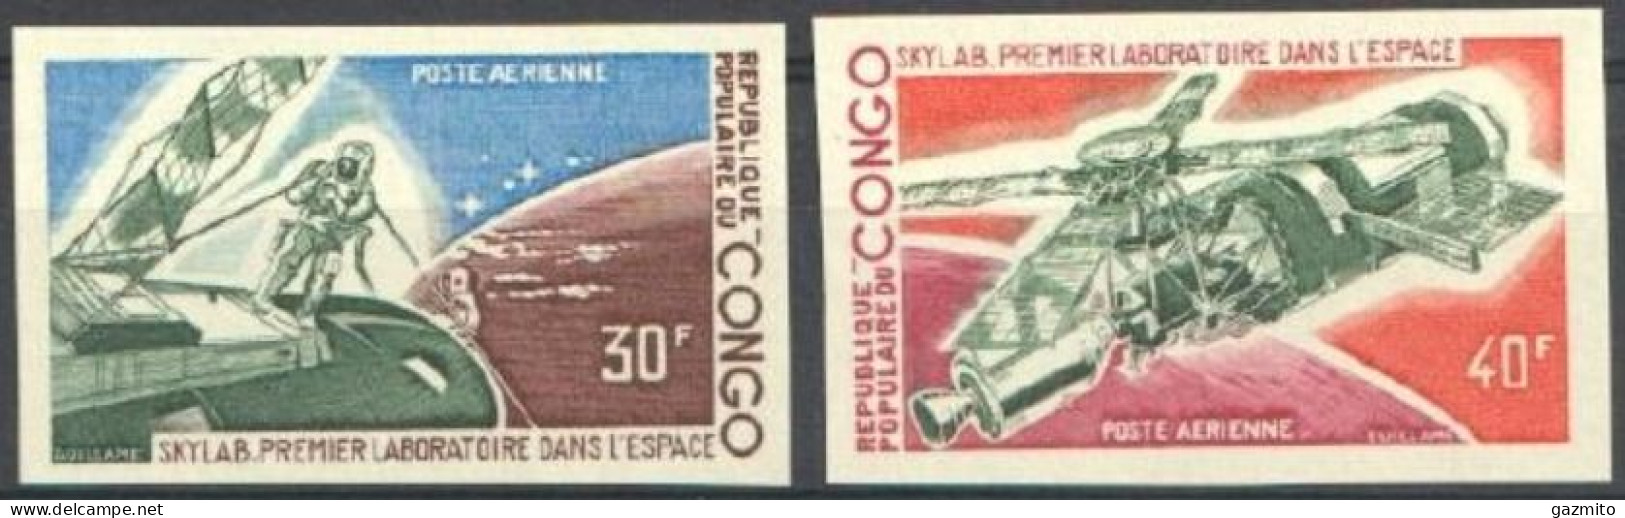 Congo Brazaville 1973, Airmail - Skylab Space Laboratory, 2val IMPERFORATED - Neufs